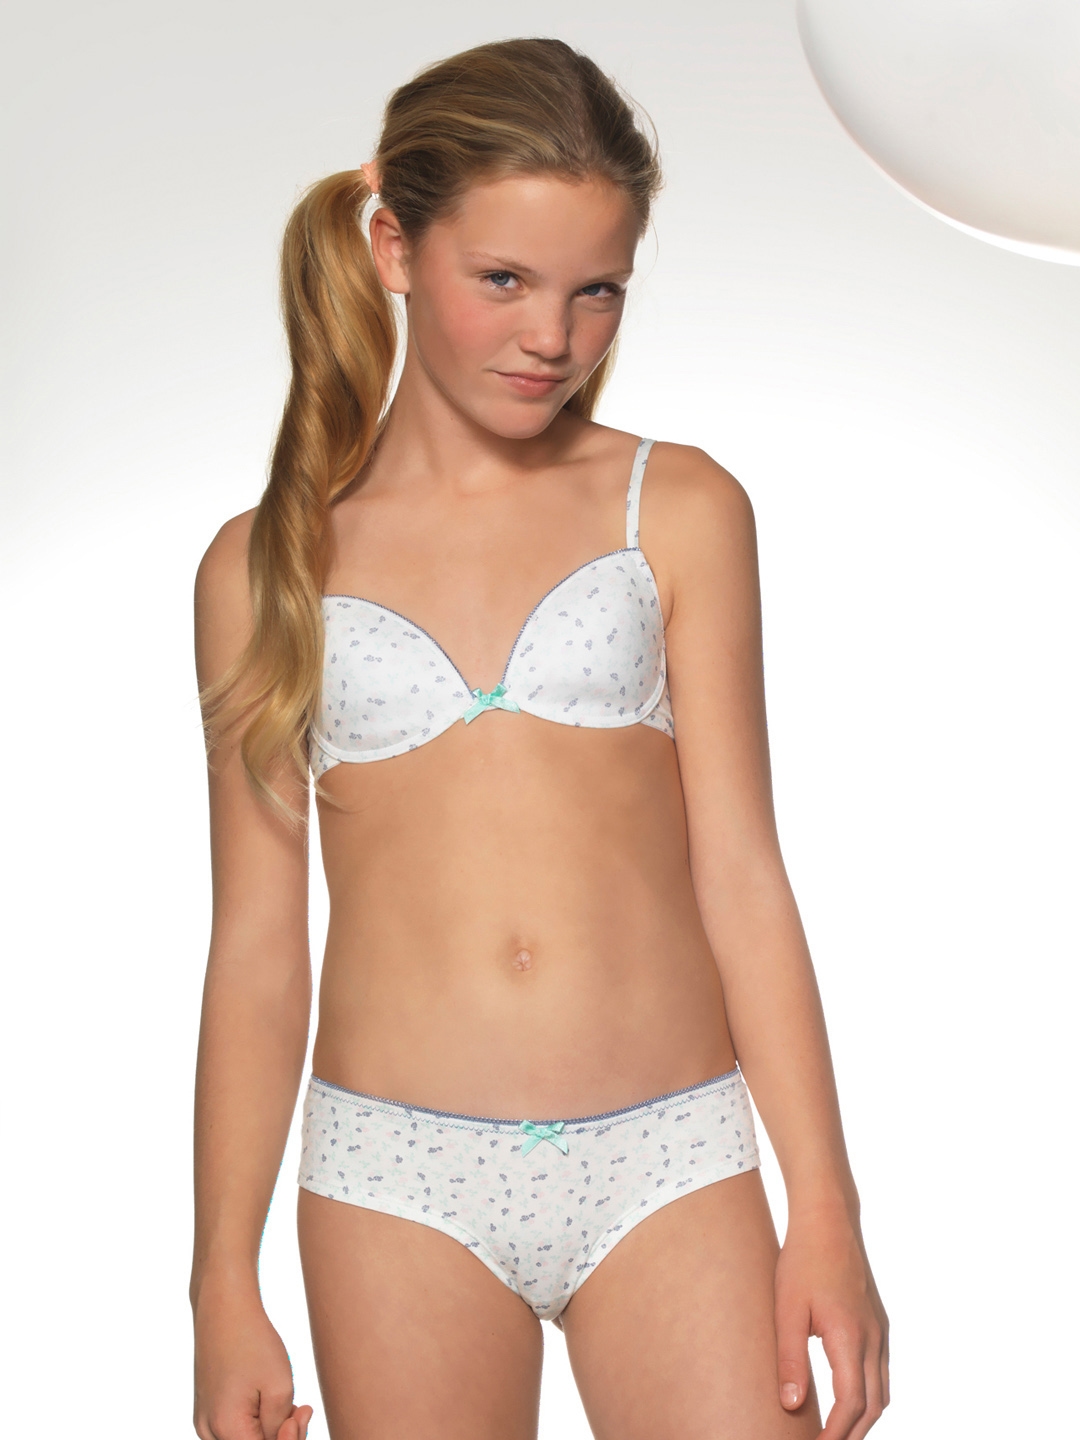 Boobs Bloomers White Bra - Buy Boobs Bloomers White Bra online in India